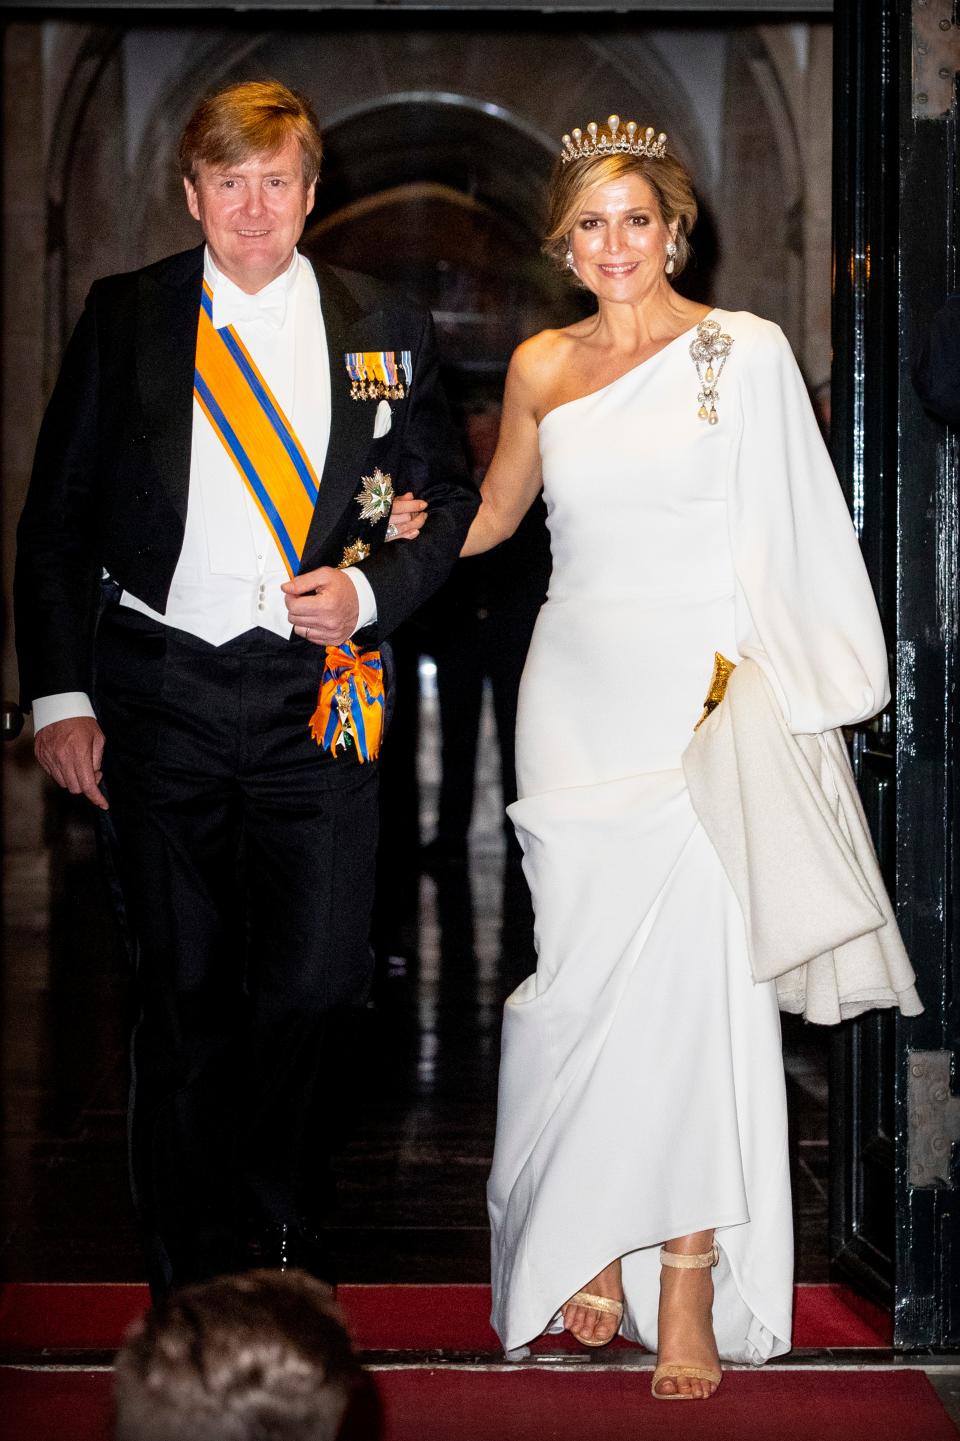 King Willem-Alexander of The Netherlands with Queen Maxima of The Netherlands, wearing a white one-shoulder dress